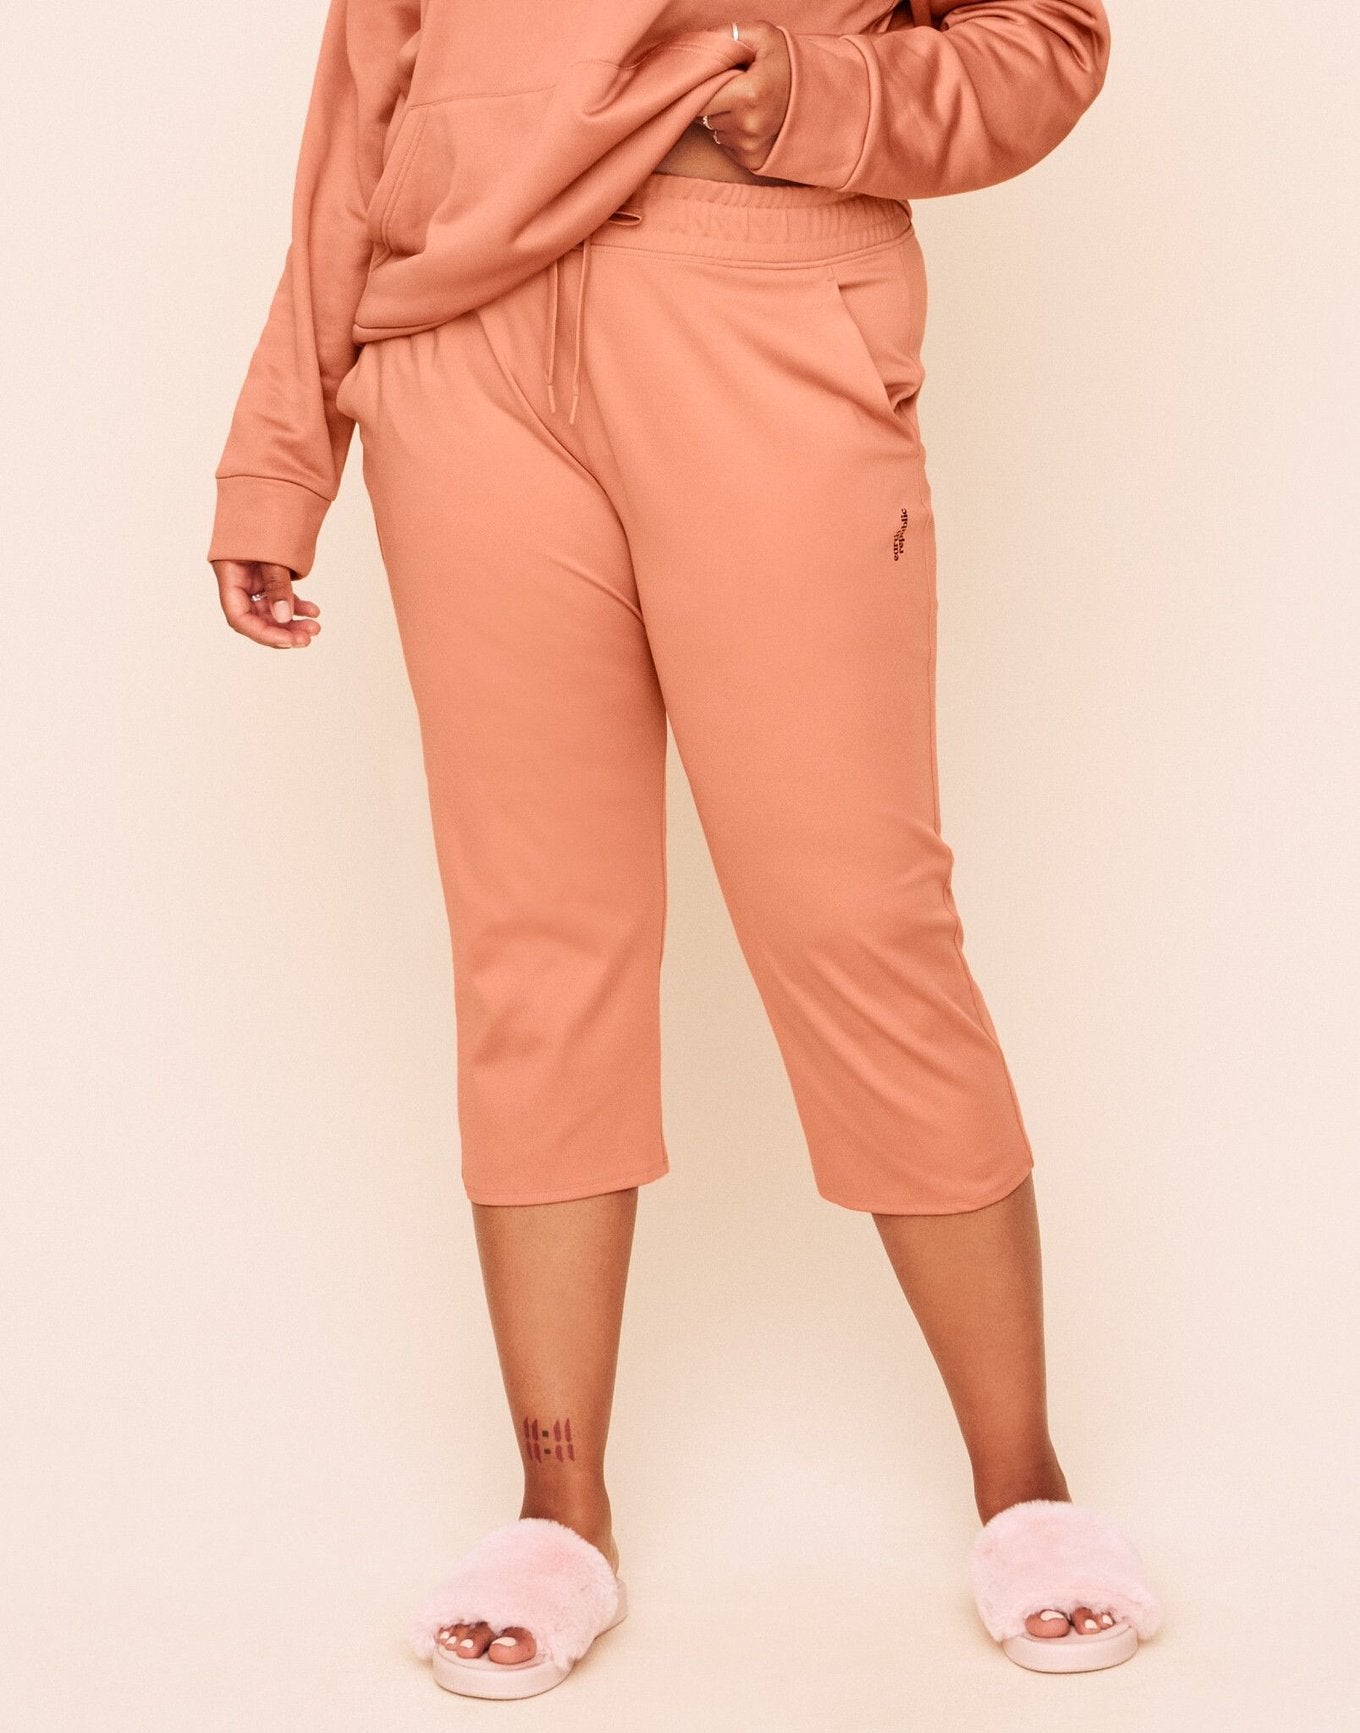 Earth Republic Jaelyn Cropped Pant Cropped Pant in color Rhododendron Marl and shape pant